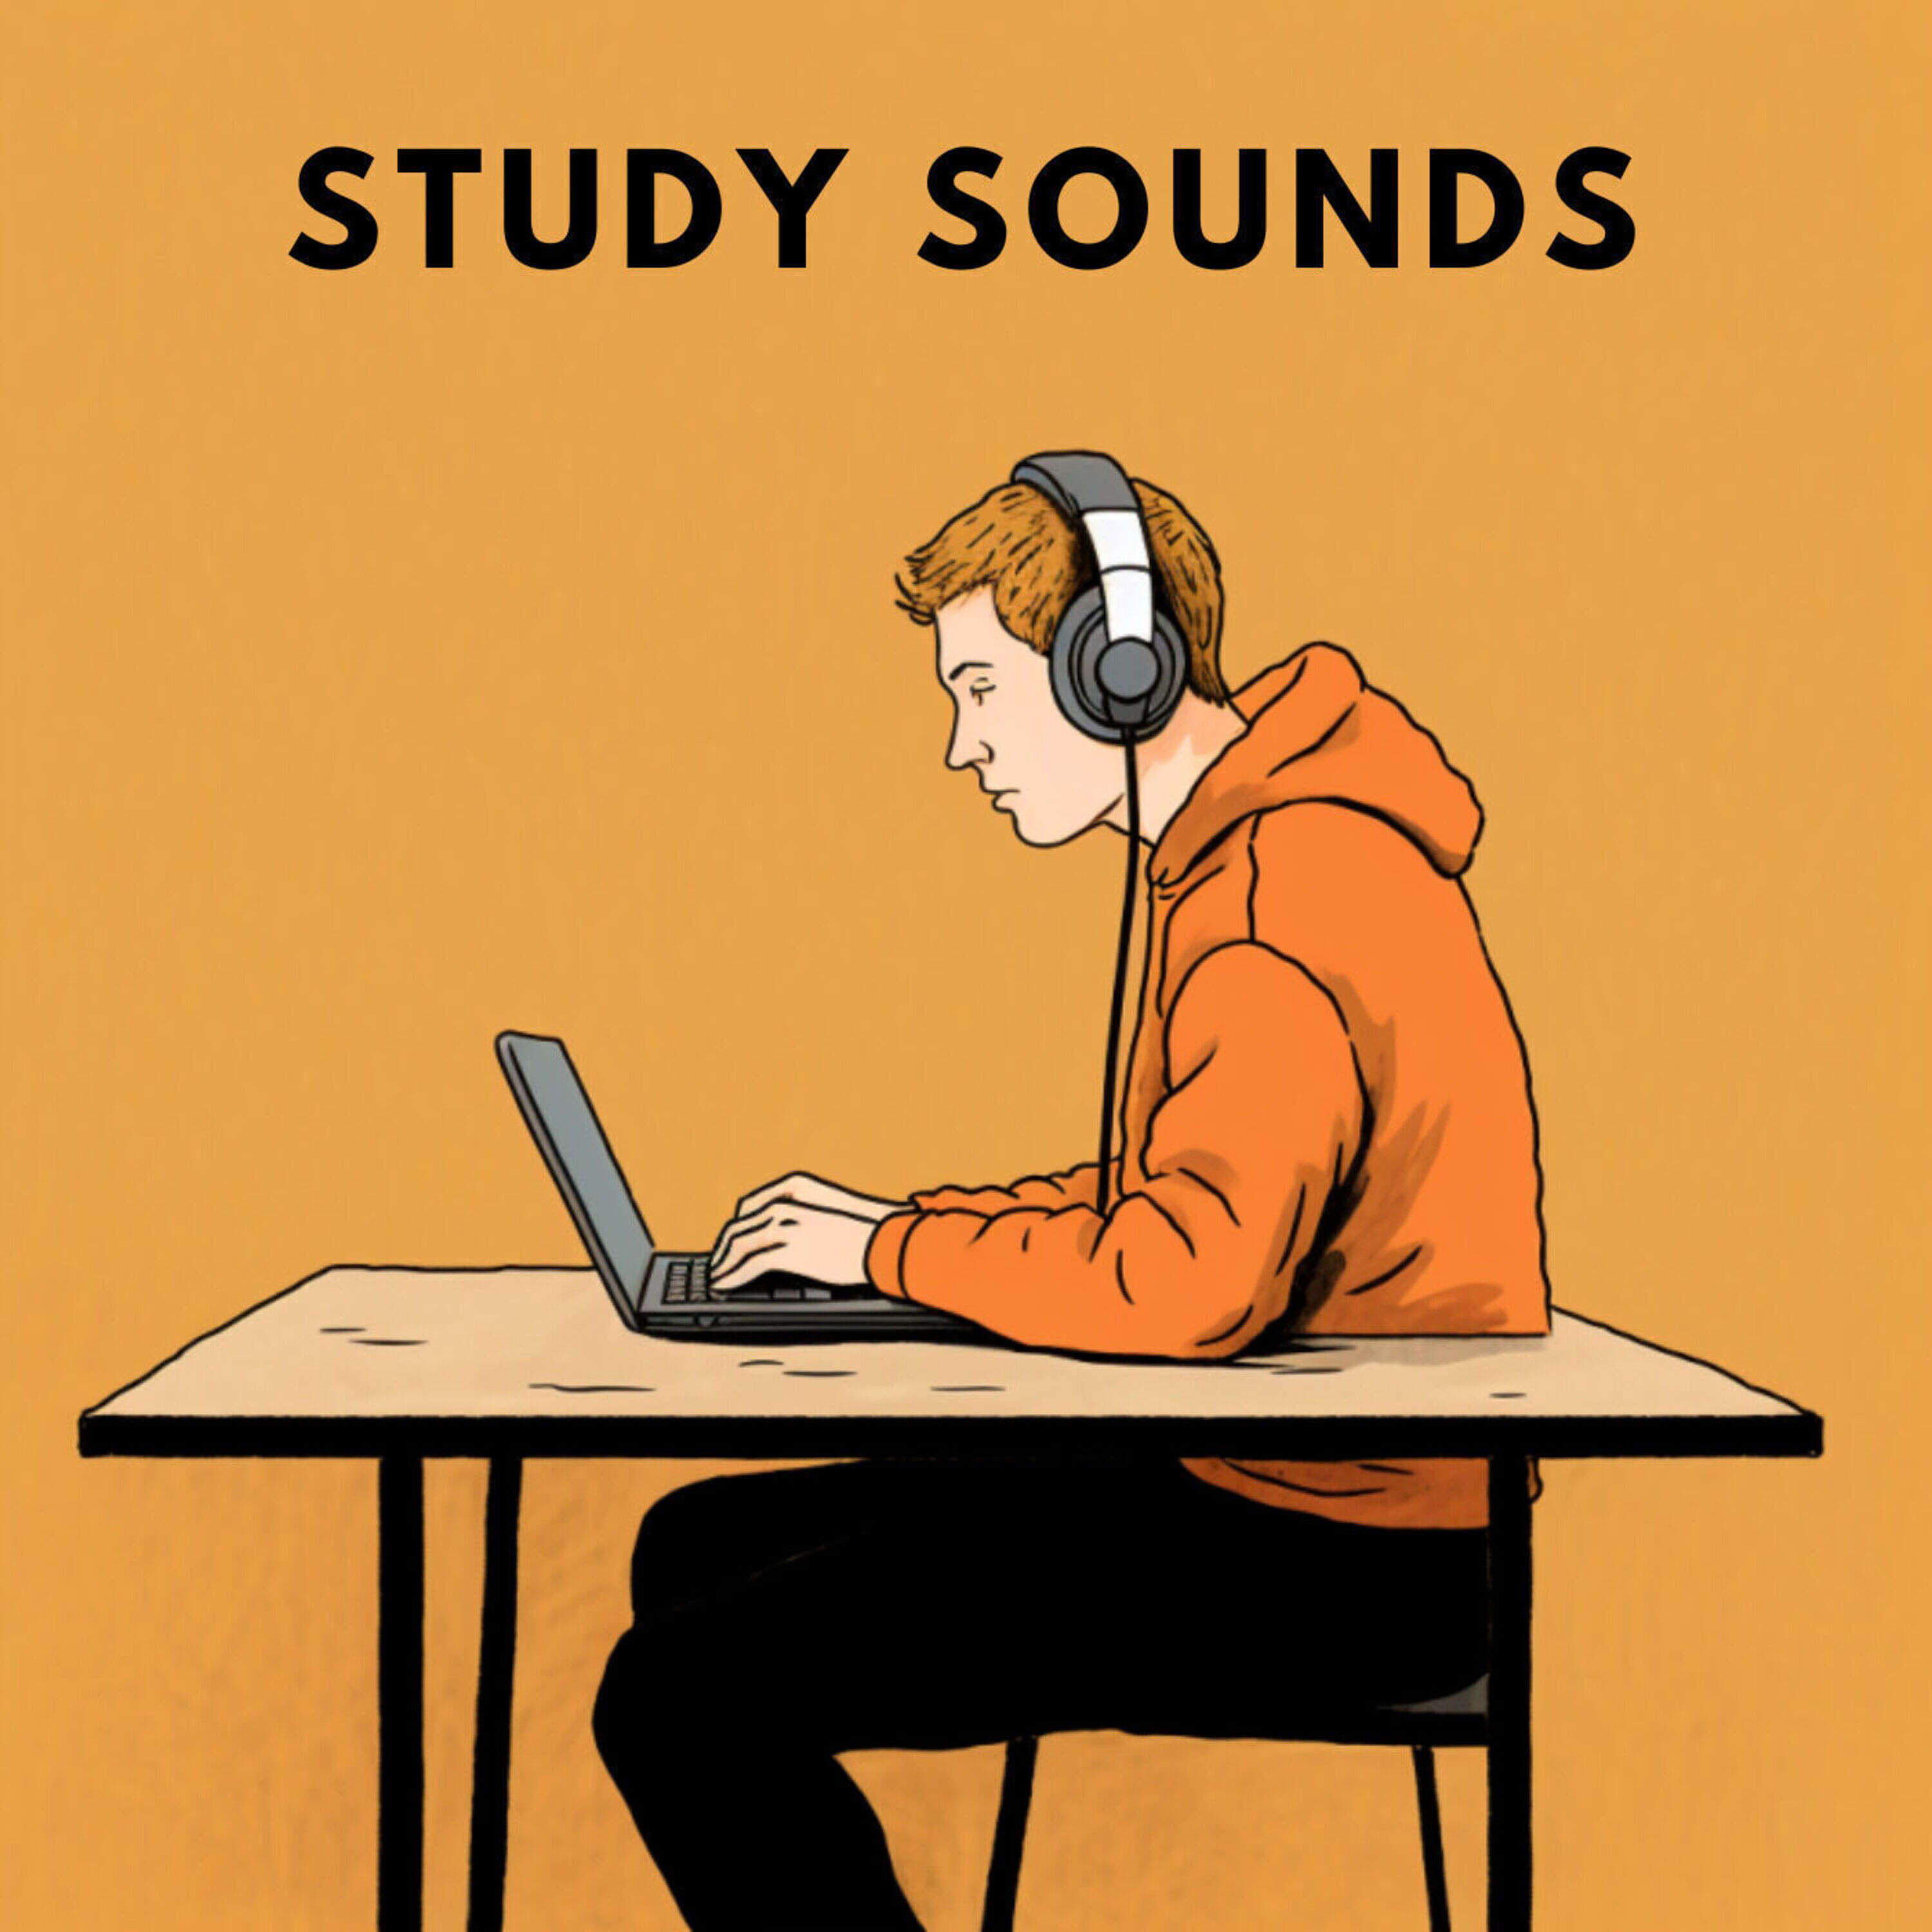 Classical Sounds for Studying and Concentration | Relaxing Piano | Study Sounds